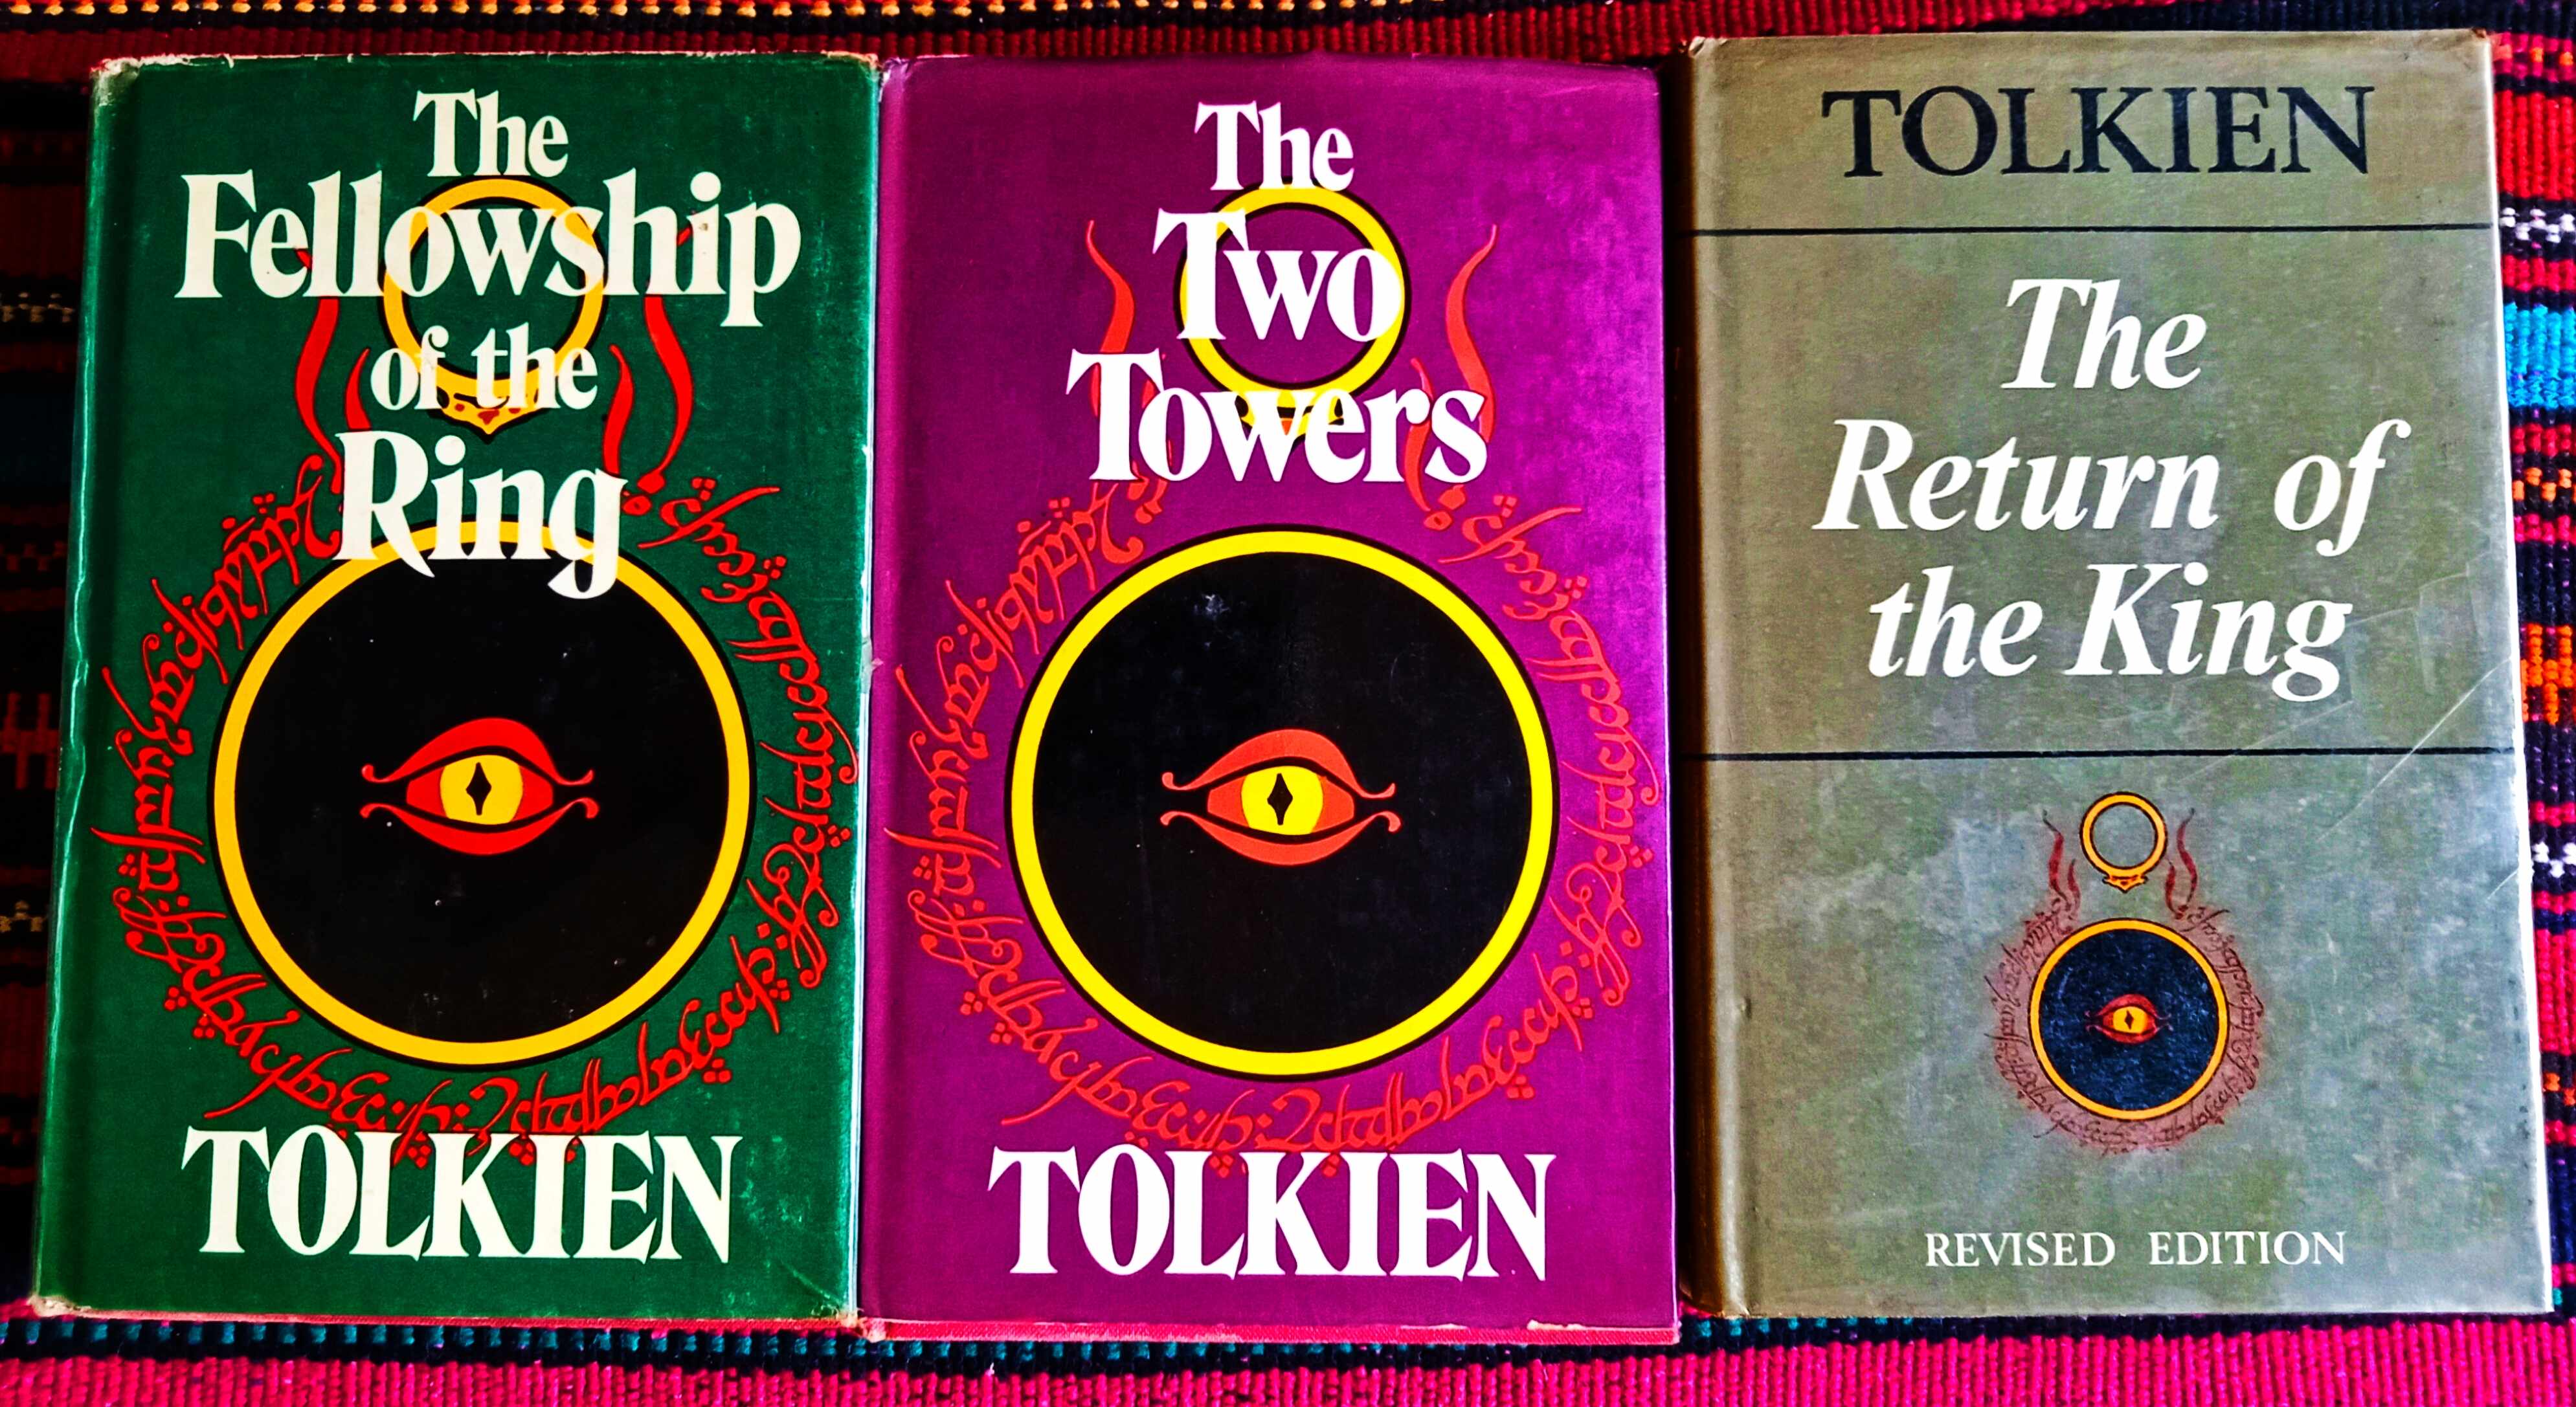 lord of the rings: 3 volumes set